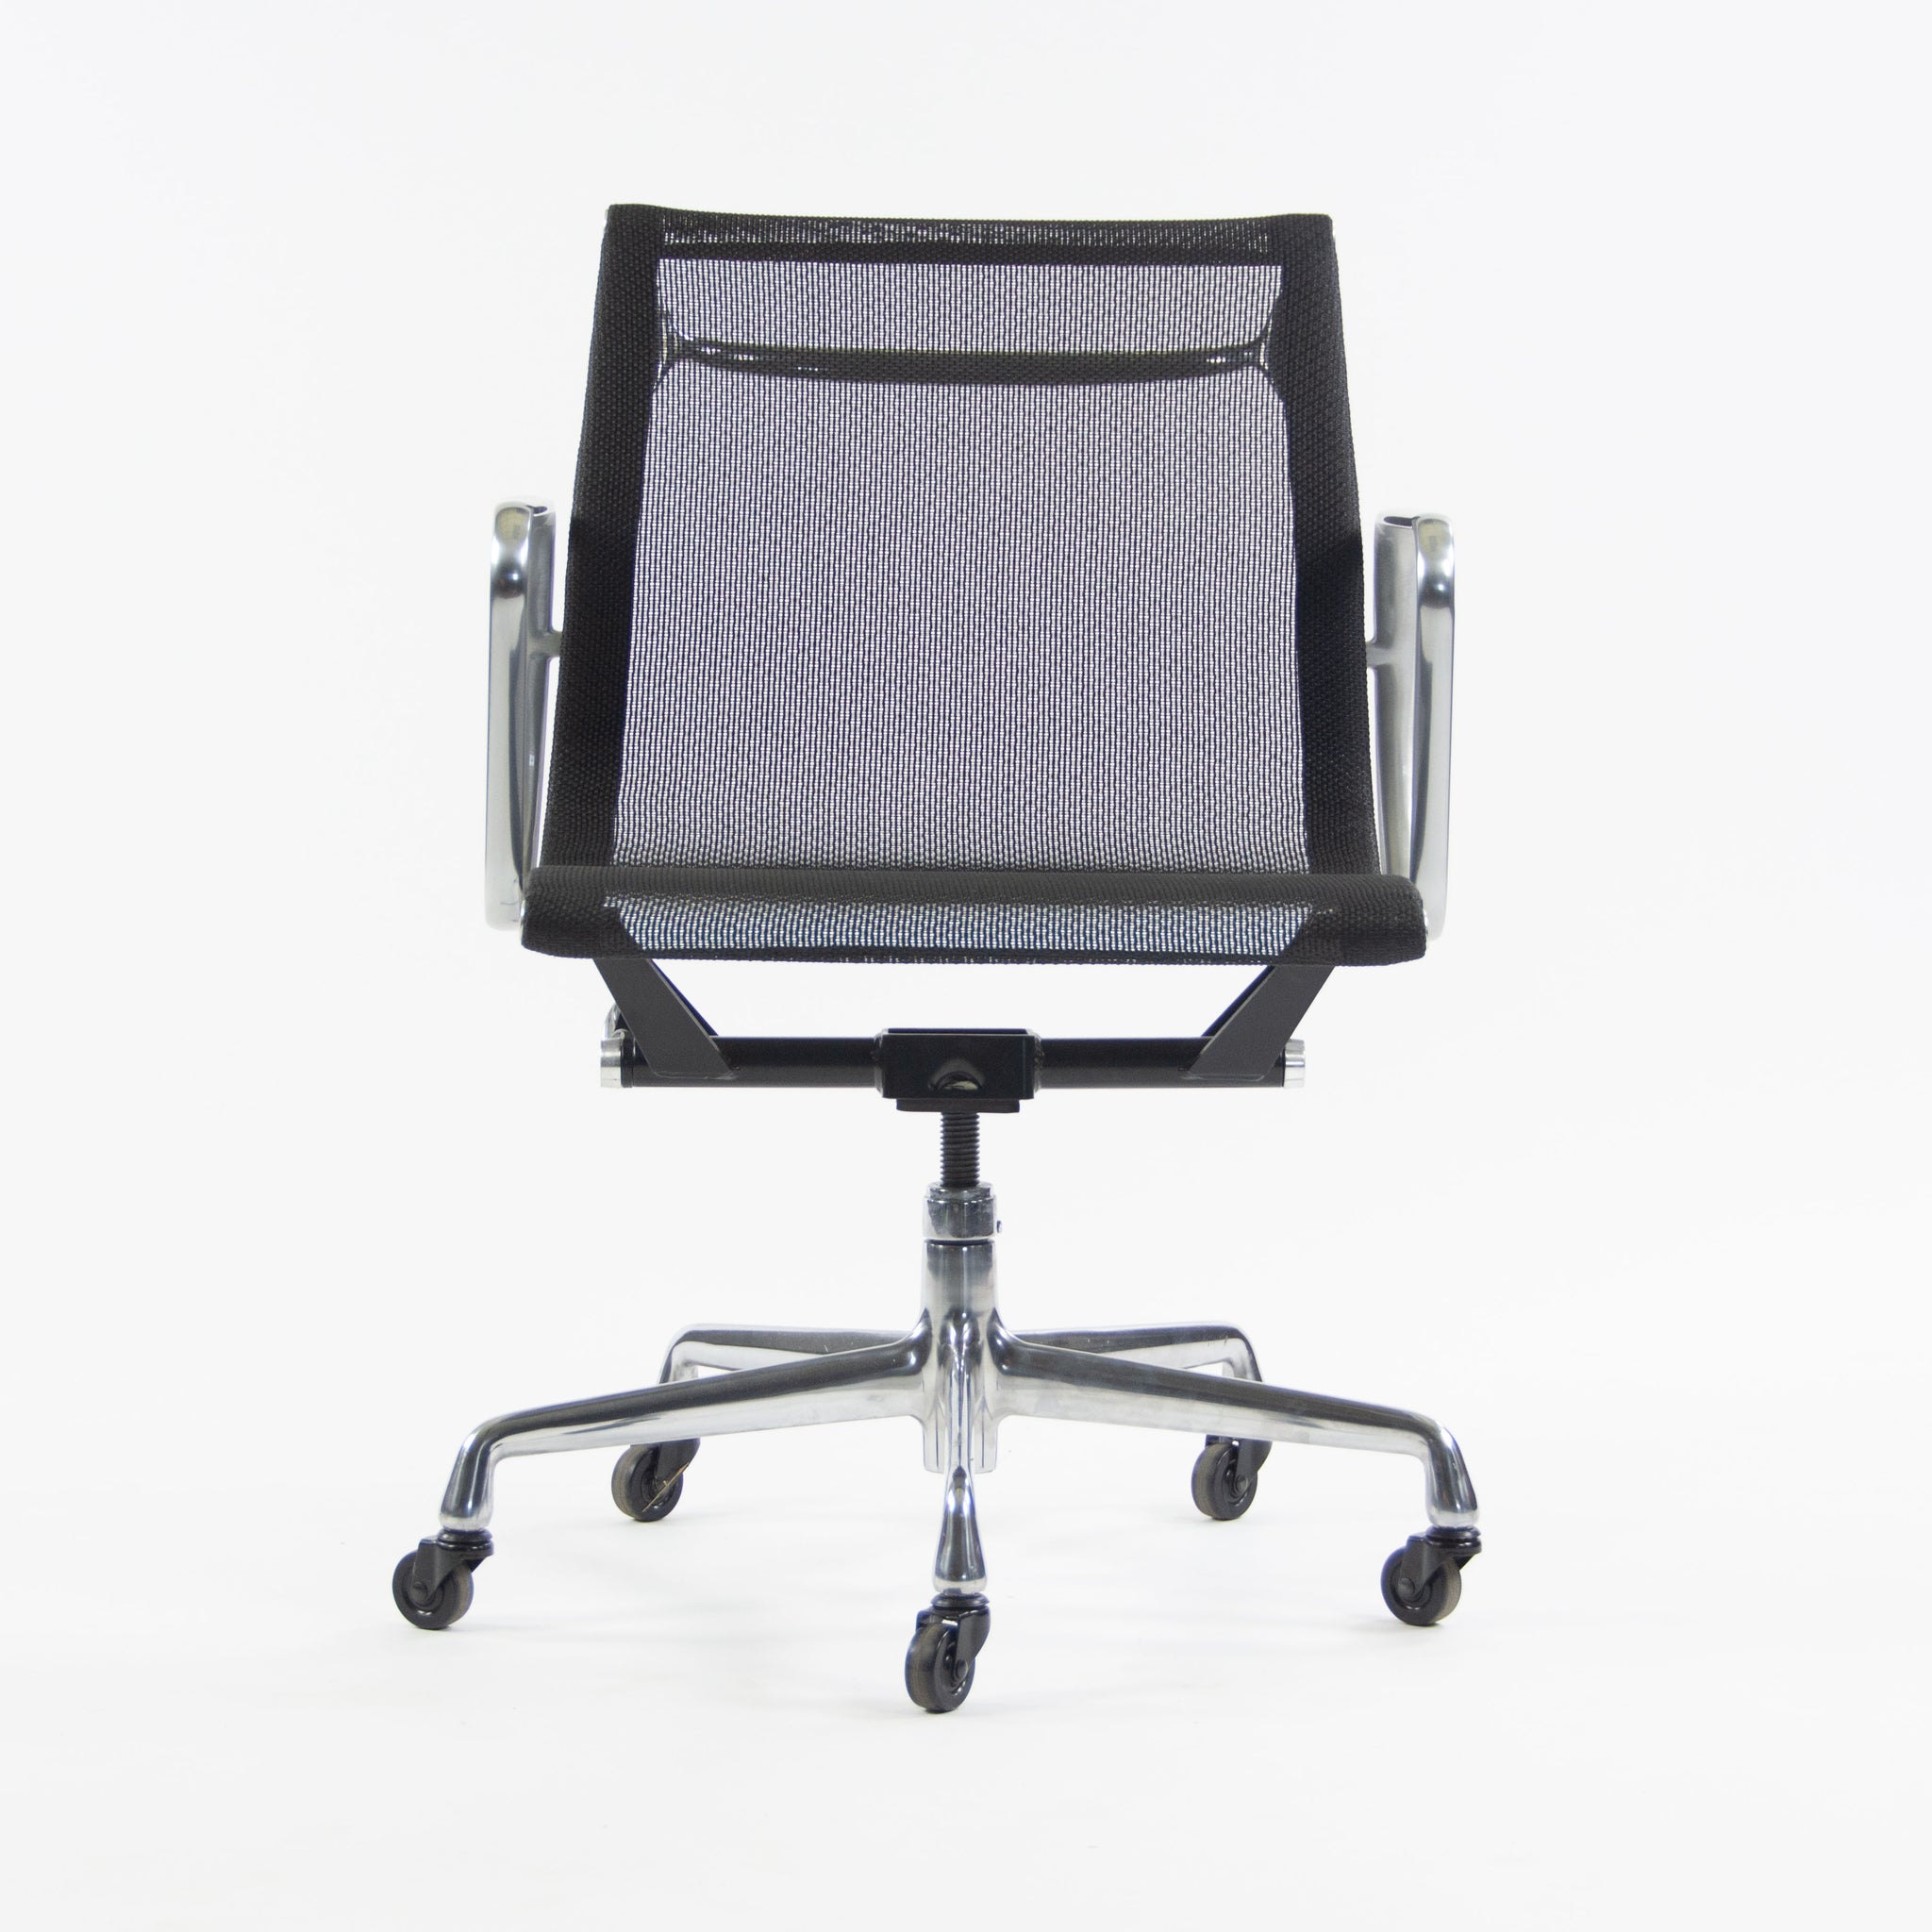 SOLD Herman Miller Eames New Old Stock Low Aluminum Group Management Desk Chair Mesh